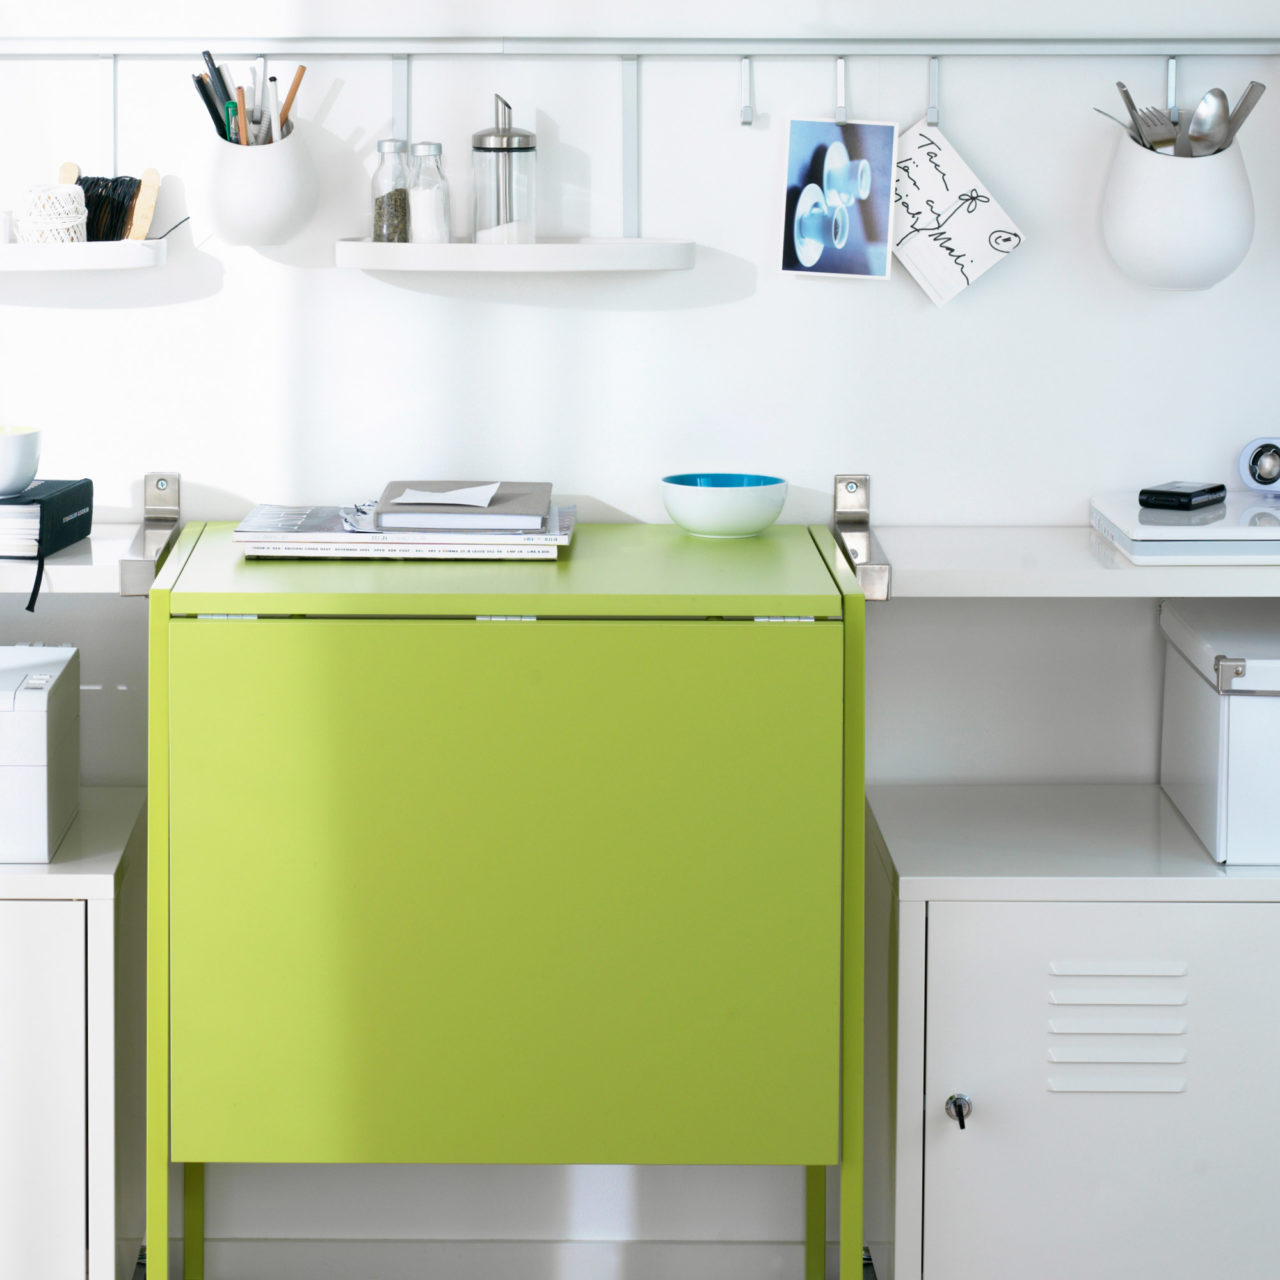 A white wall section where a lime-green folding table is surrounded by shelves, metal cabinets and small storage in white.